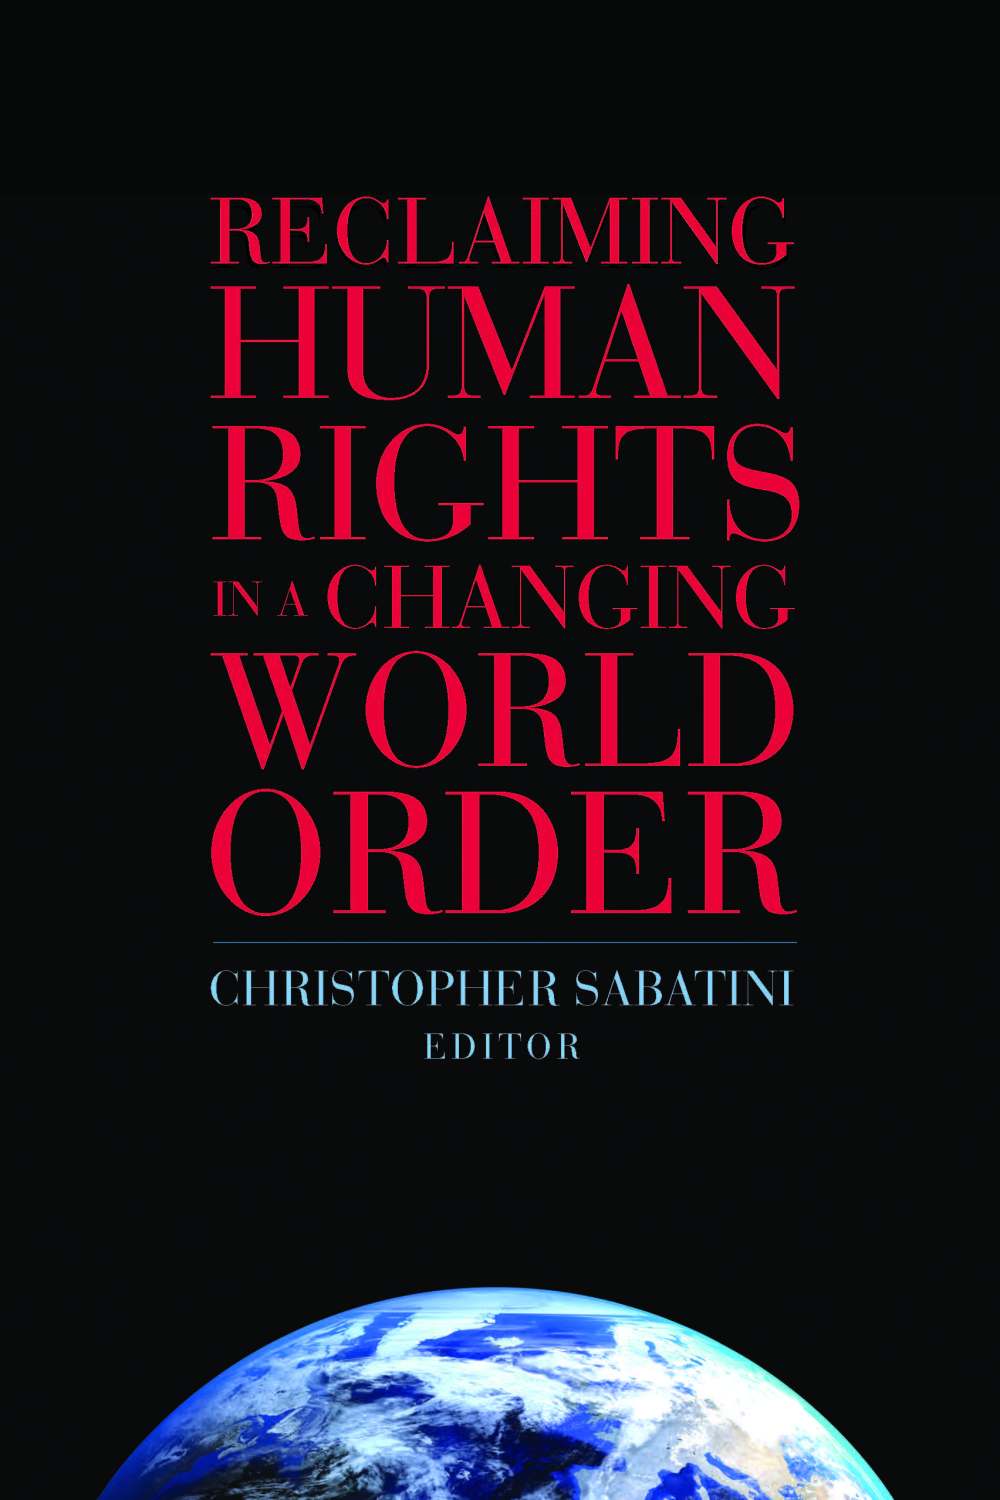 Reclaiming Human Rights in a Changing World Order book cover